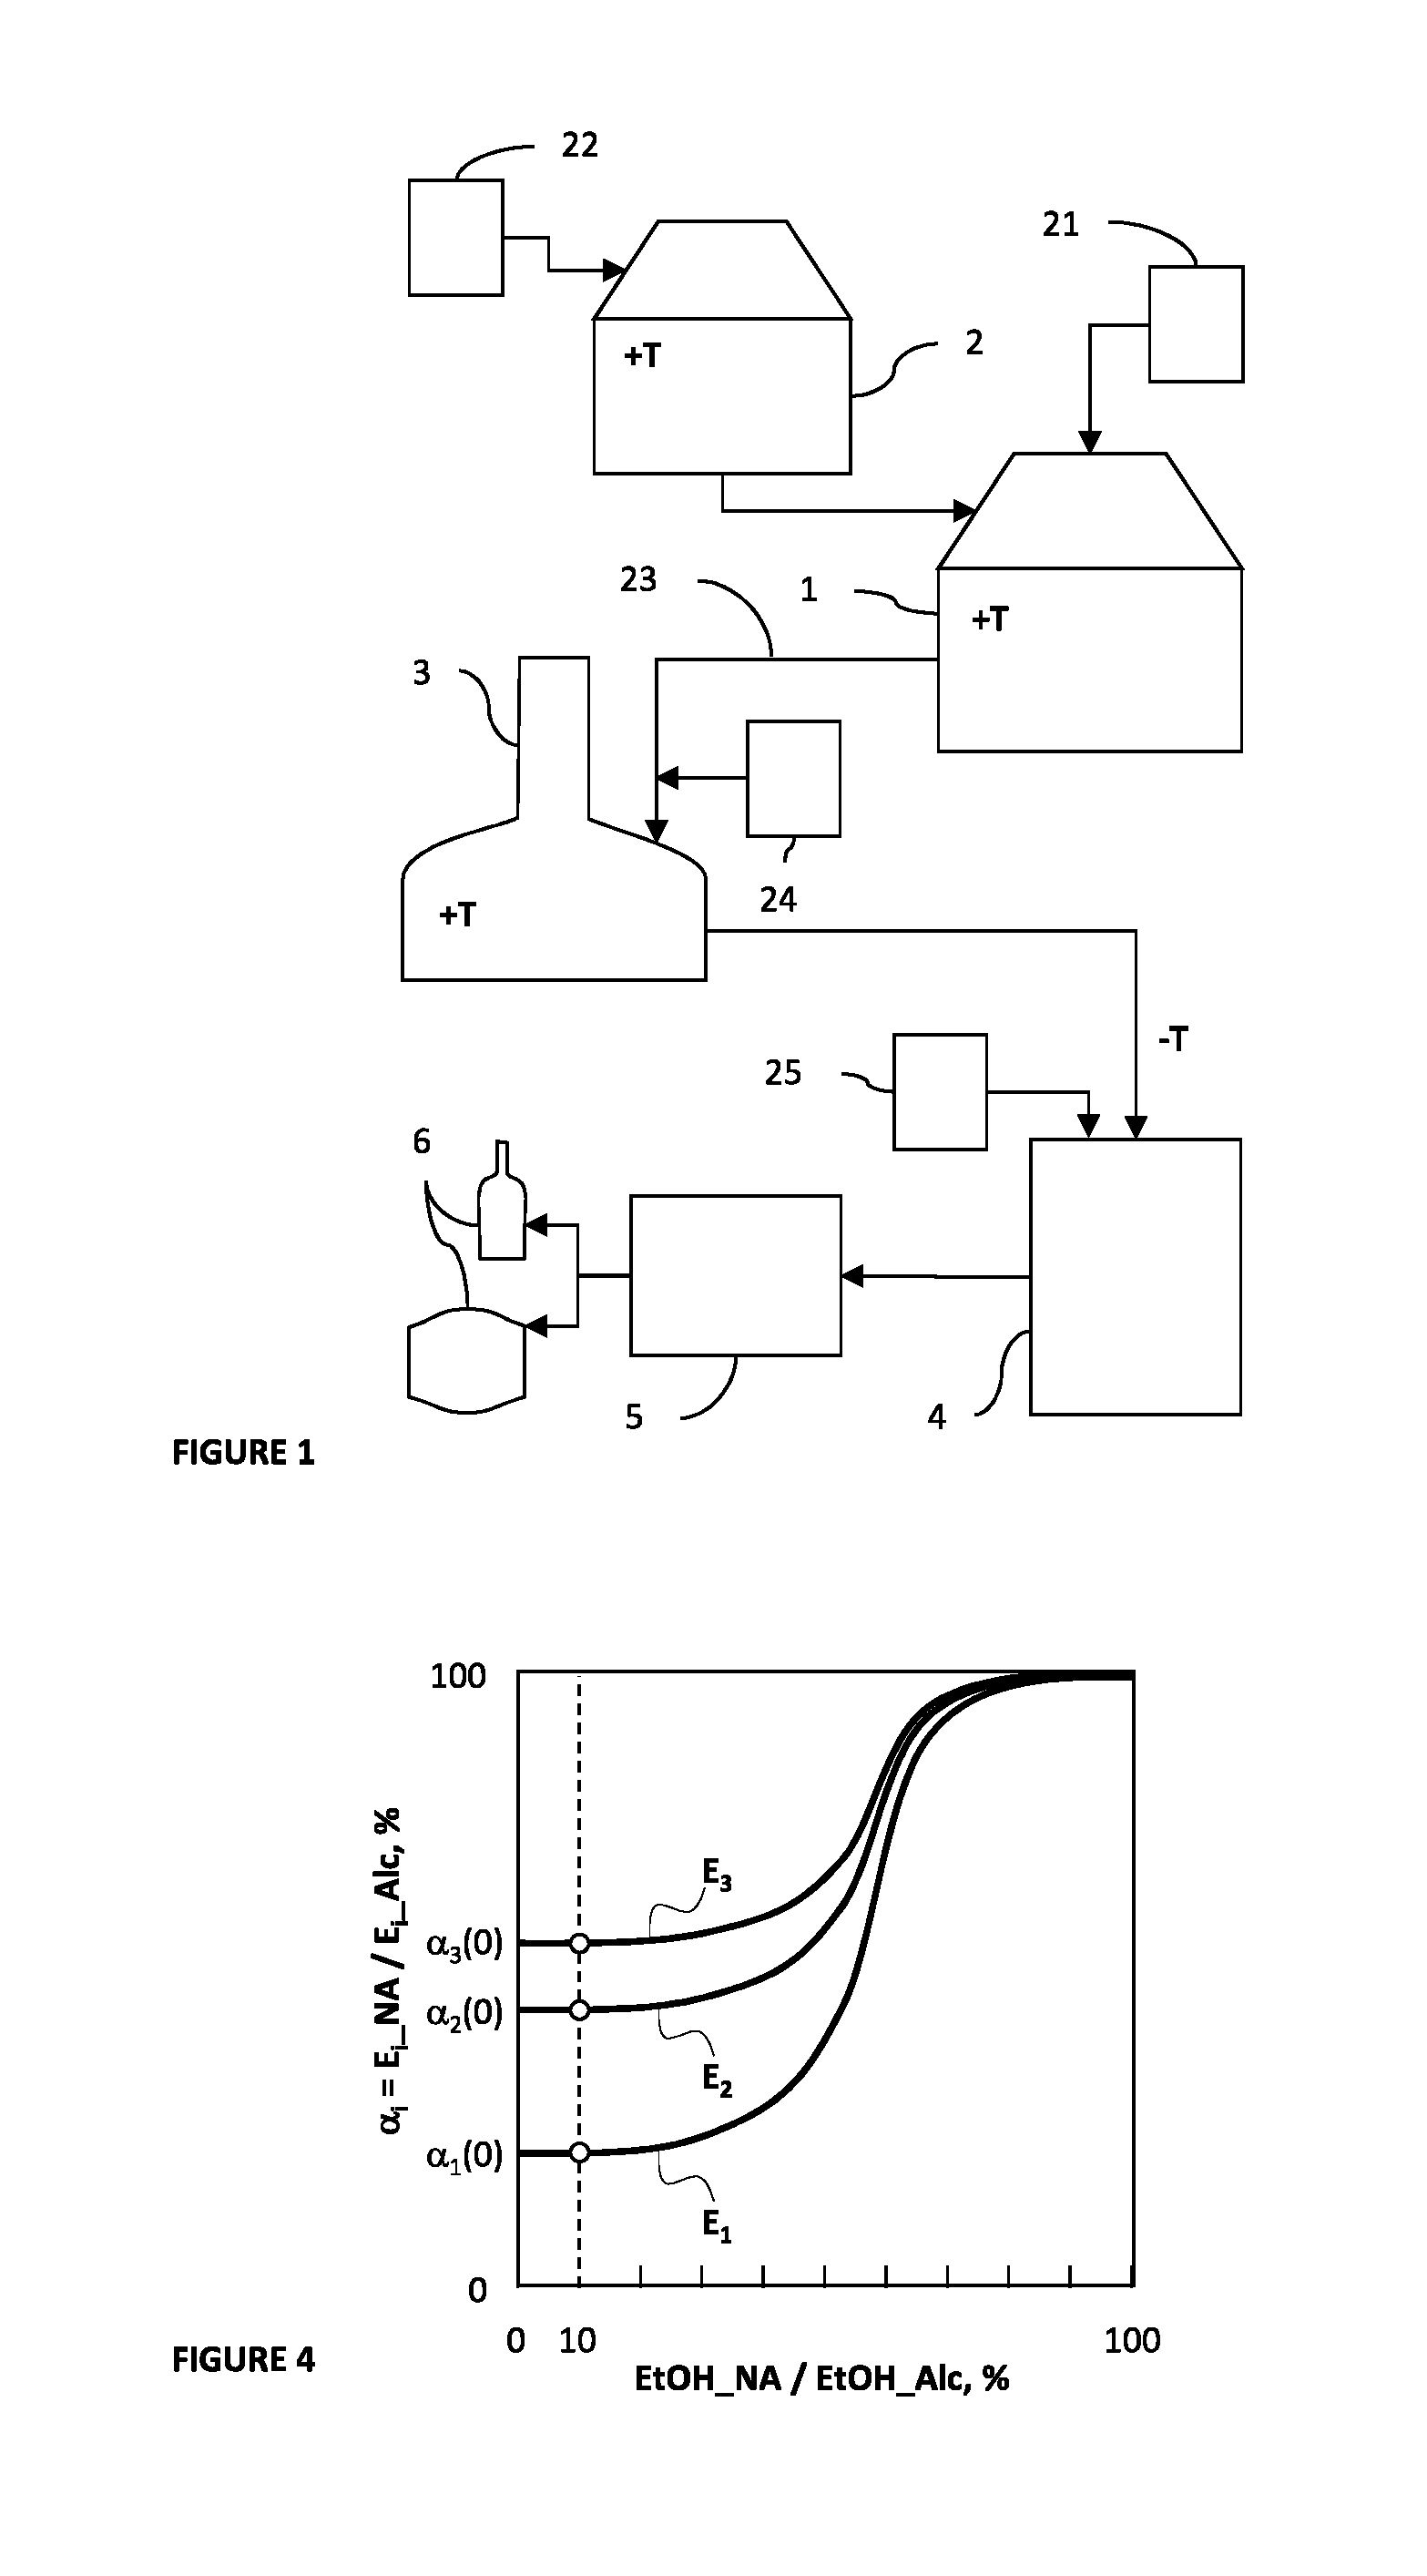 Low Alcohol or Alcohol Free Fermented Malt Based Beverage and Method for Producing It